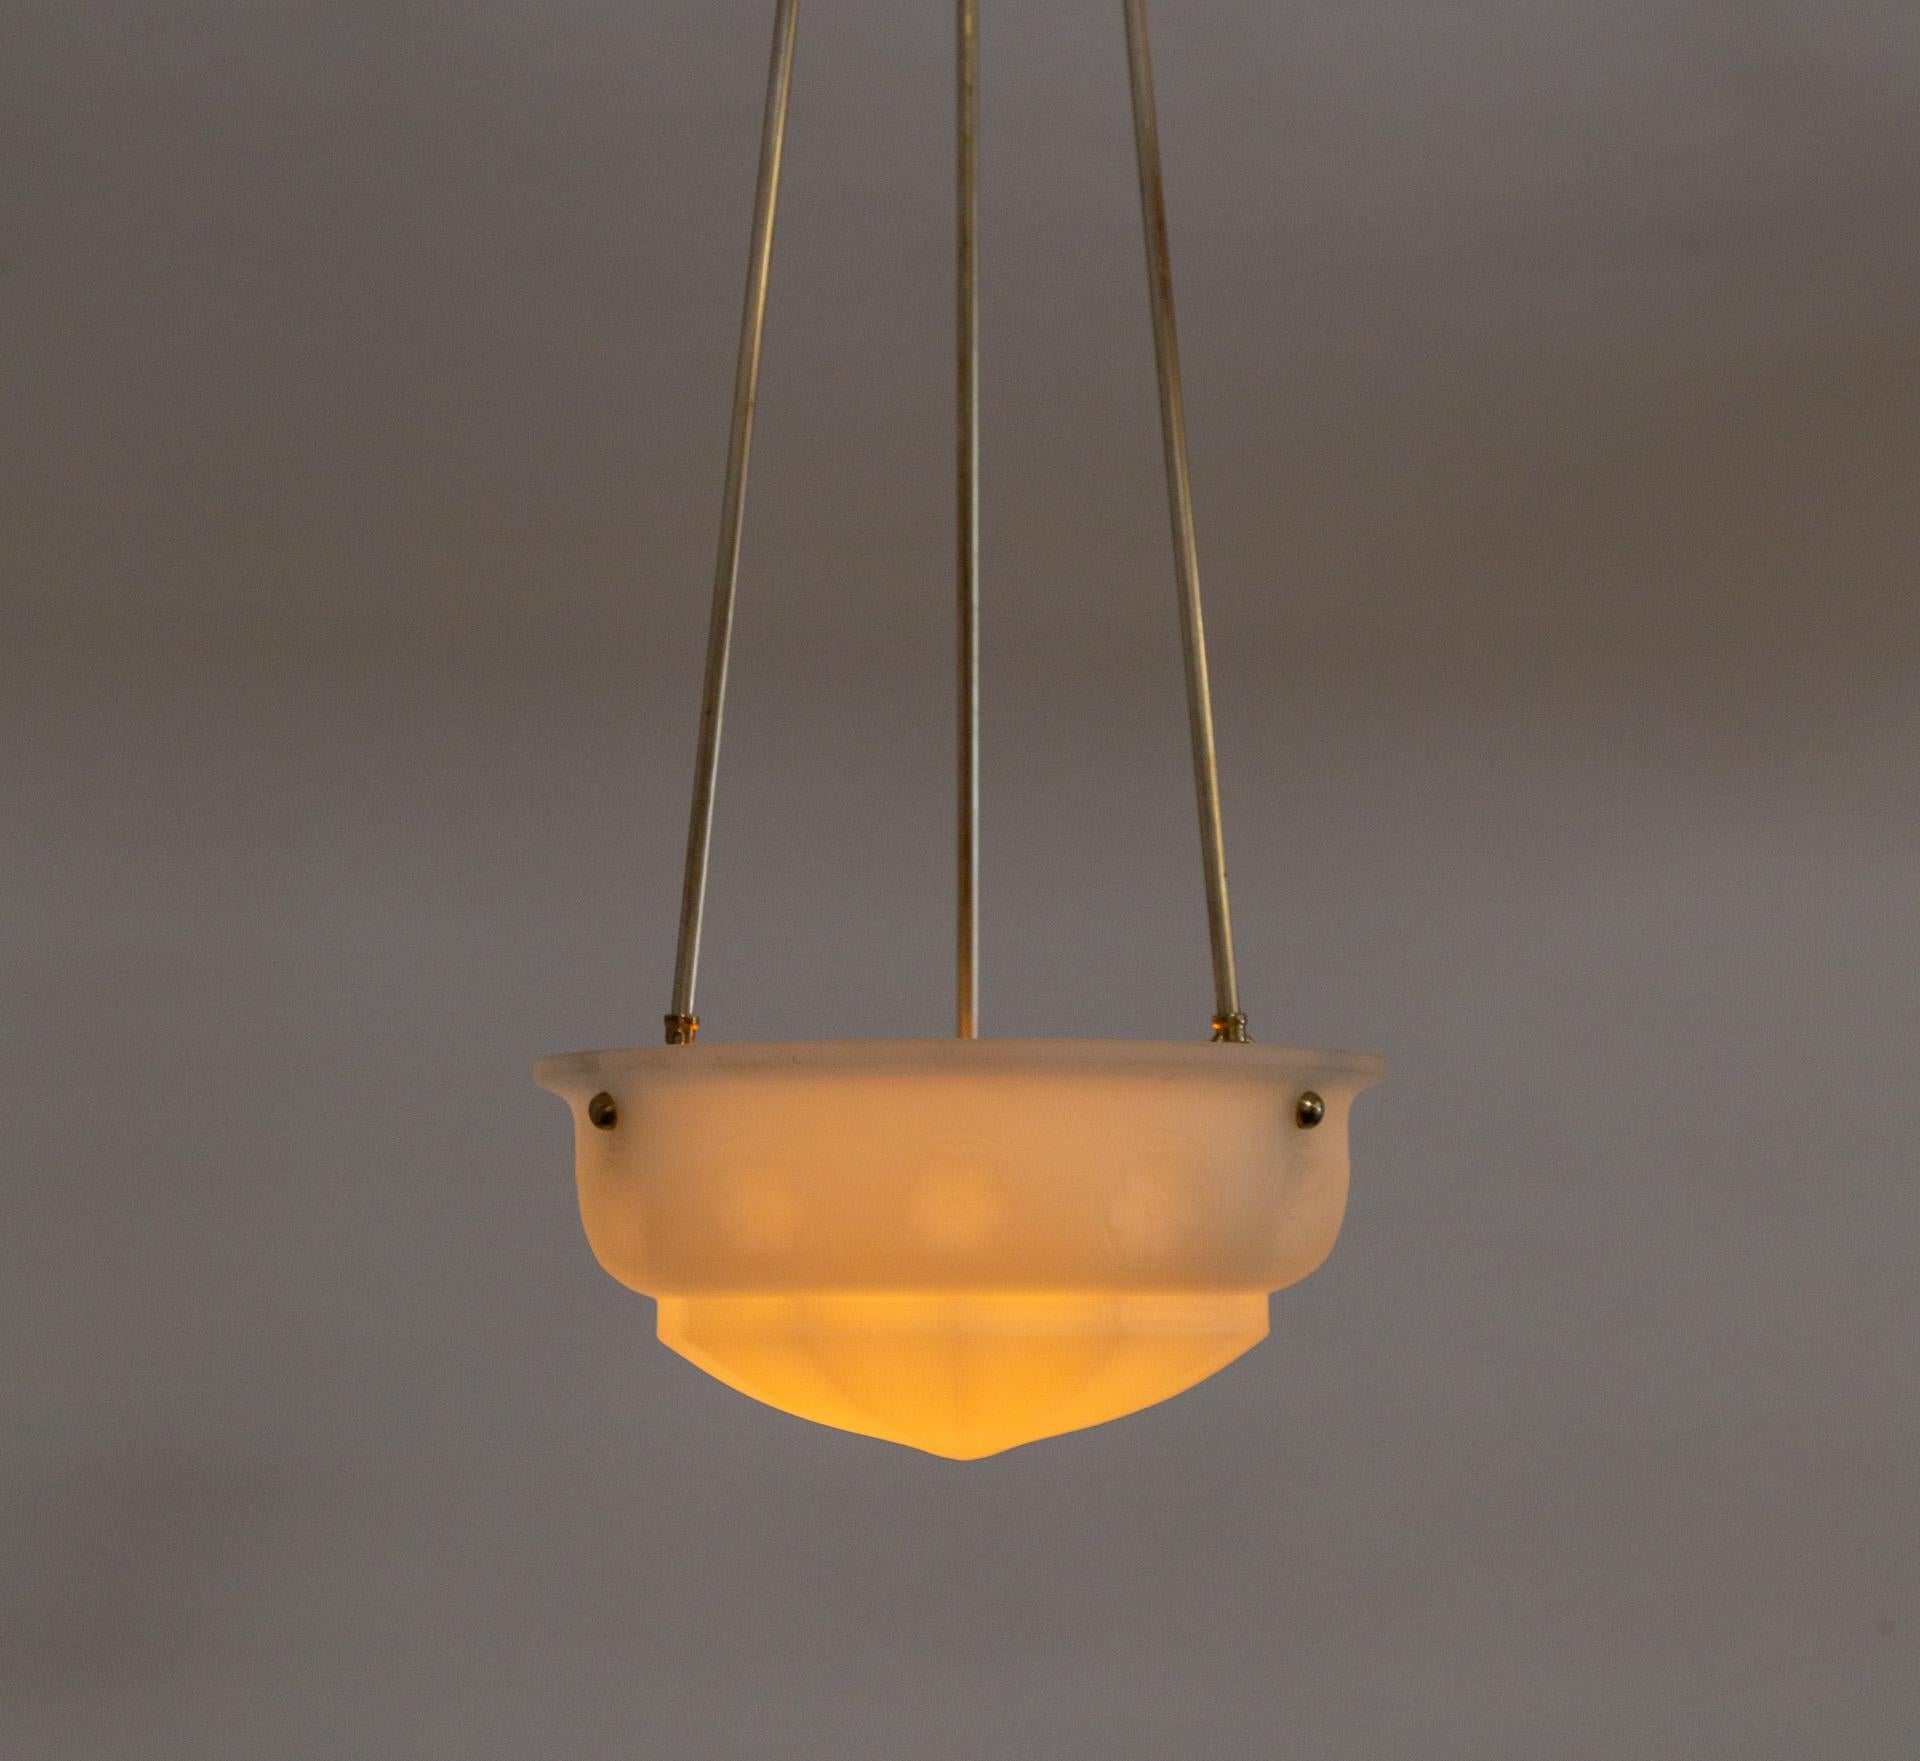 A three-stem pendant light with a frosted glass shade from the early 1900s.  The glass is a lovely molded bowl shape with subtle rosette details.  The long, elegant stems holding the shade are pewter-tinted brass; with a matching canopy.  Newly